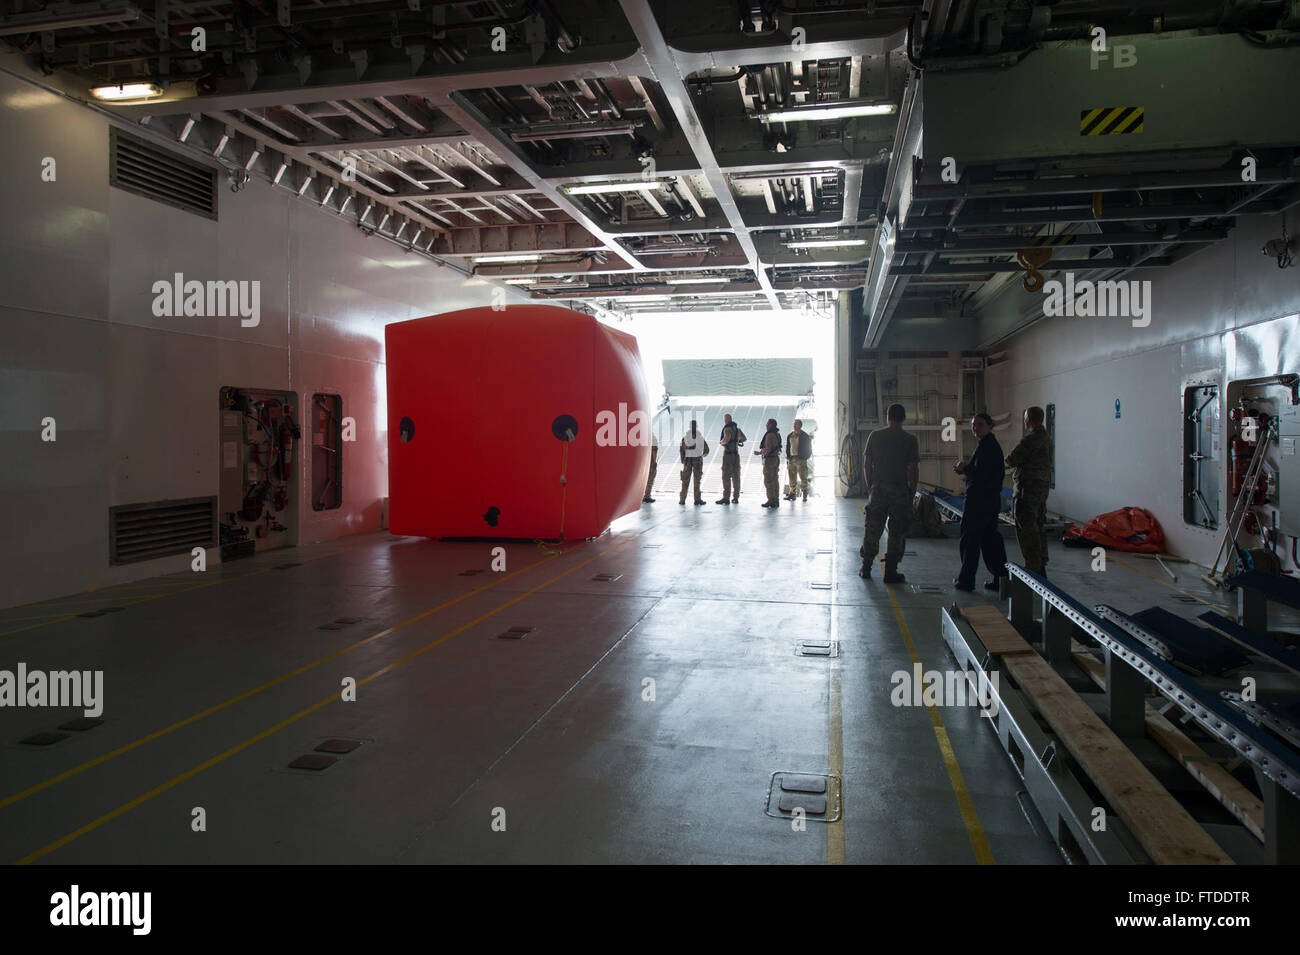 150617-N-ZE250-030 BALTIC SEA (June 17, 2015) Sailors from USS Jason Dunham (DDG 109) watch as Danish sailors prepare to lower an inflatable target into the water from the hangar bay of Danish Navy Frigate HDMS Absalon (L16) prior to a live fire exercise June 17, 2015. Jason Dunham, an Arleigh Burke-class guided-missile destroyer homeported in Norfolk, is participating in exercise Baltic Operations (BALTOPS) 2015. BALTOPS is an annually recurring multinational exercise designed to enhance flexibility and interoperability, as well as demonstrate resolve of Allied and partner forces to defend th Stock Photo